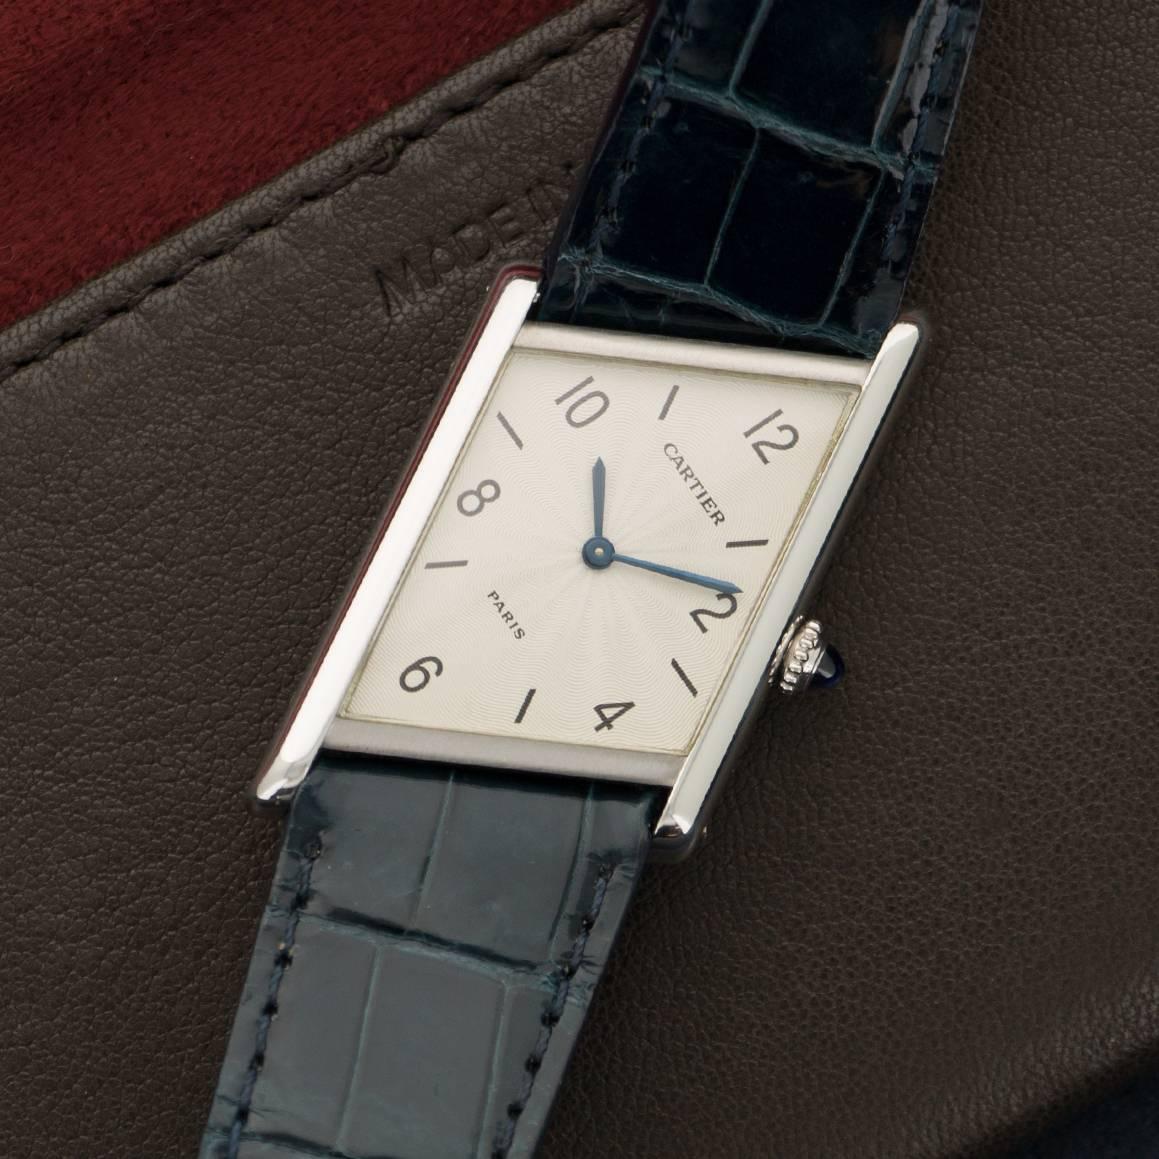 A Platinum Asymmetric Tank Watch by Cartier. Model Number 1996. Limited to 100 Pieces. Case measures 25mm X 34mm. Comes in its original box. 